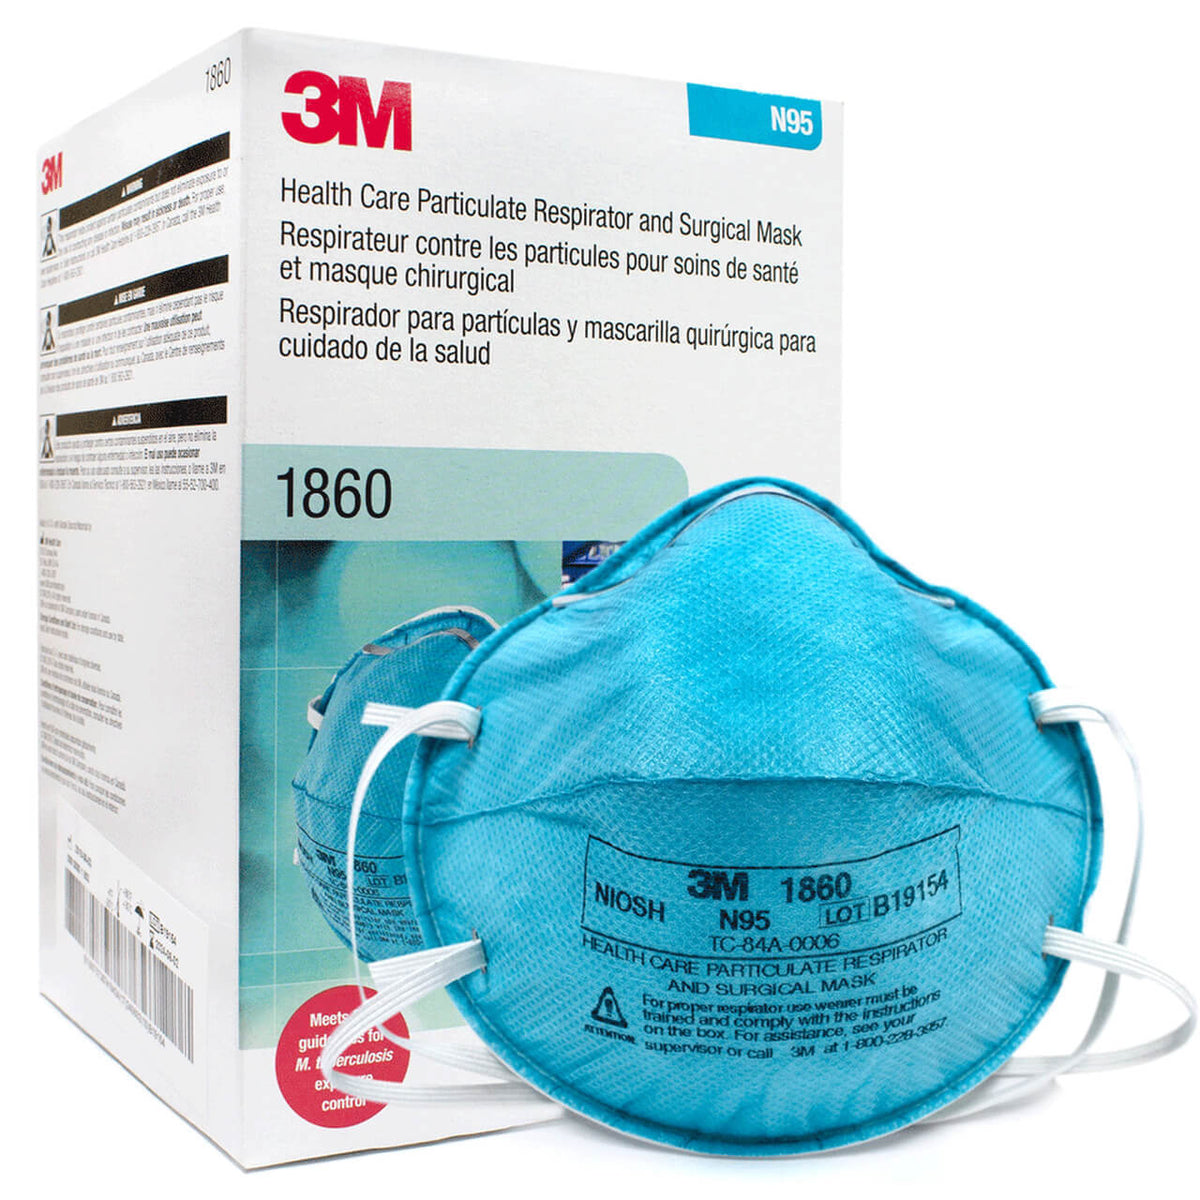 3M 1860 N95 Particulate Surgical Respirator Mask, Regular, Cup Style, Teal, Box of 20